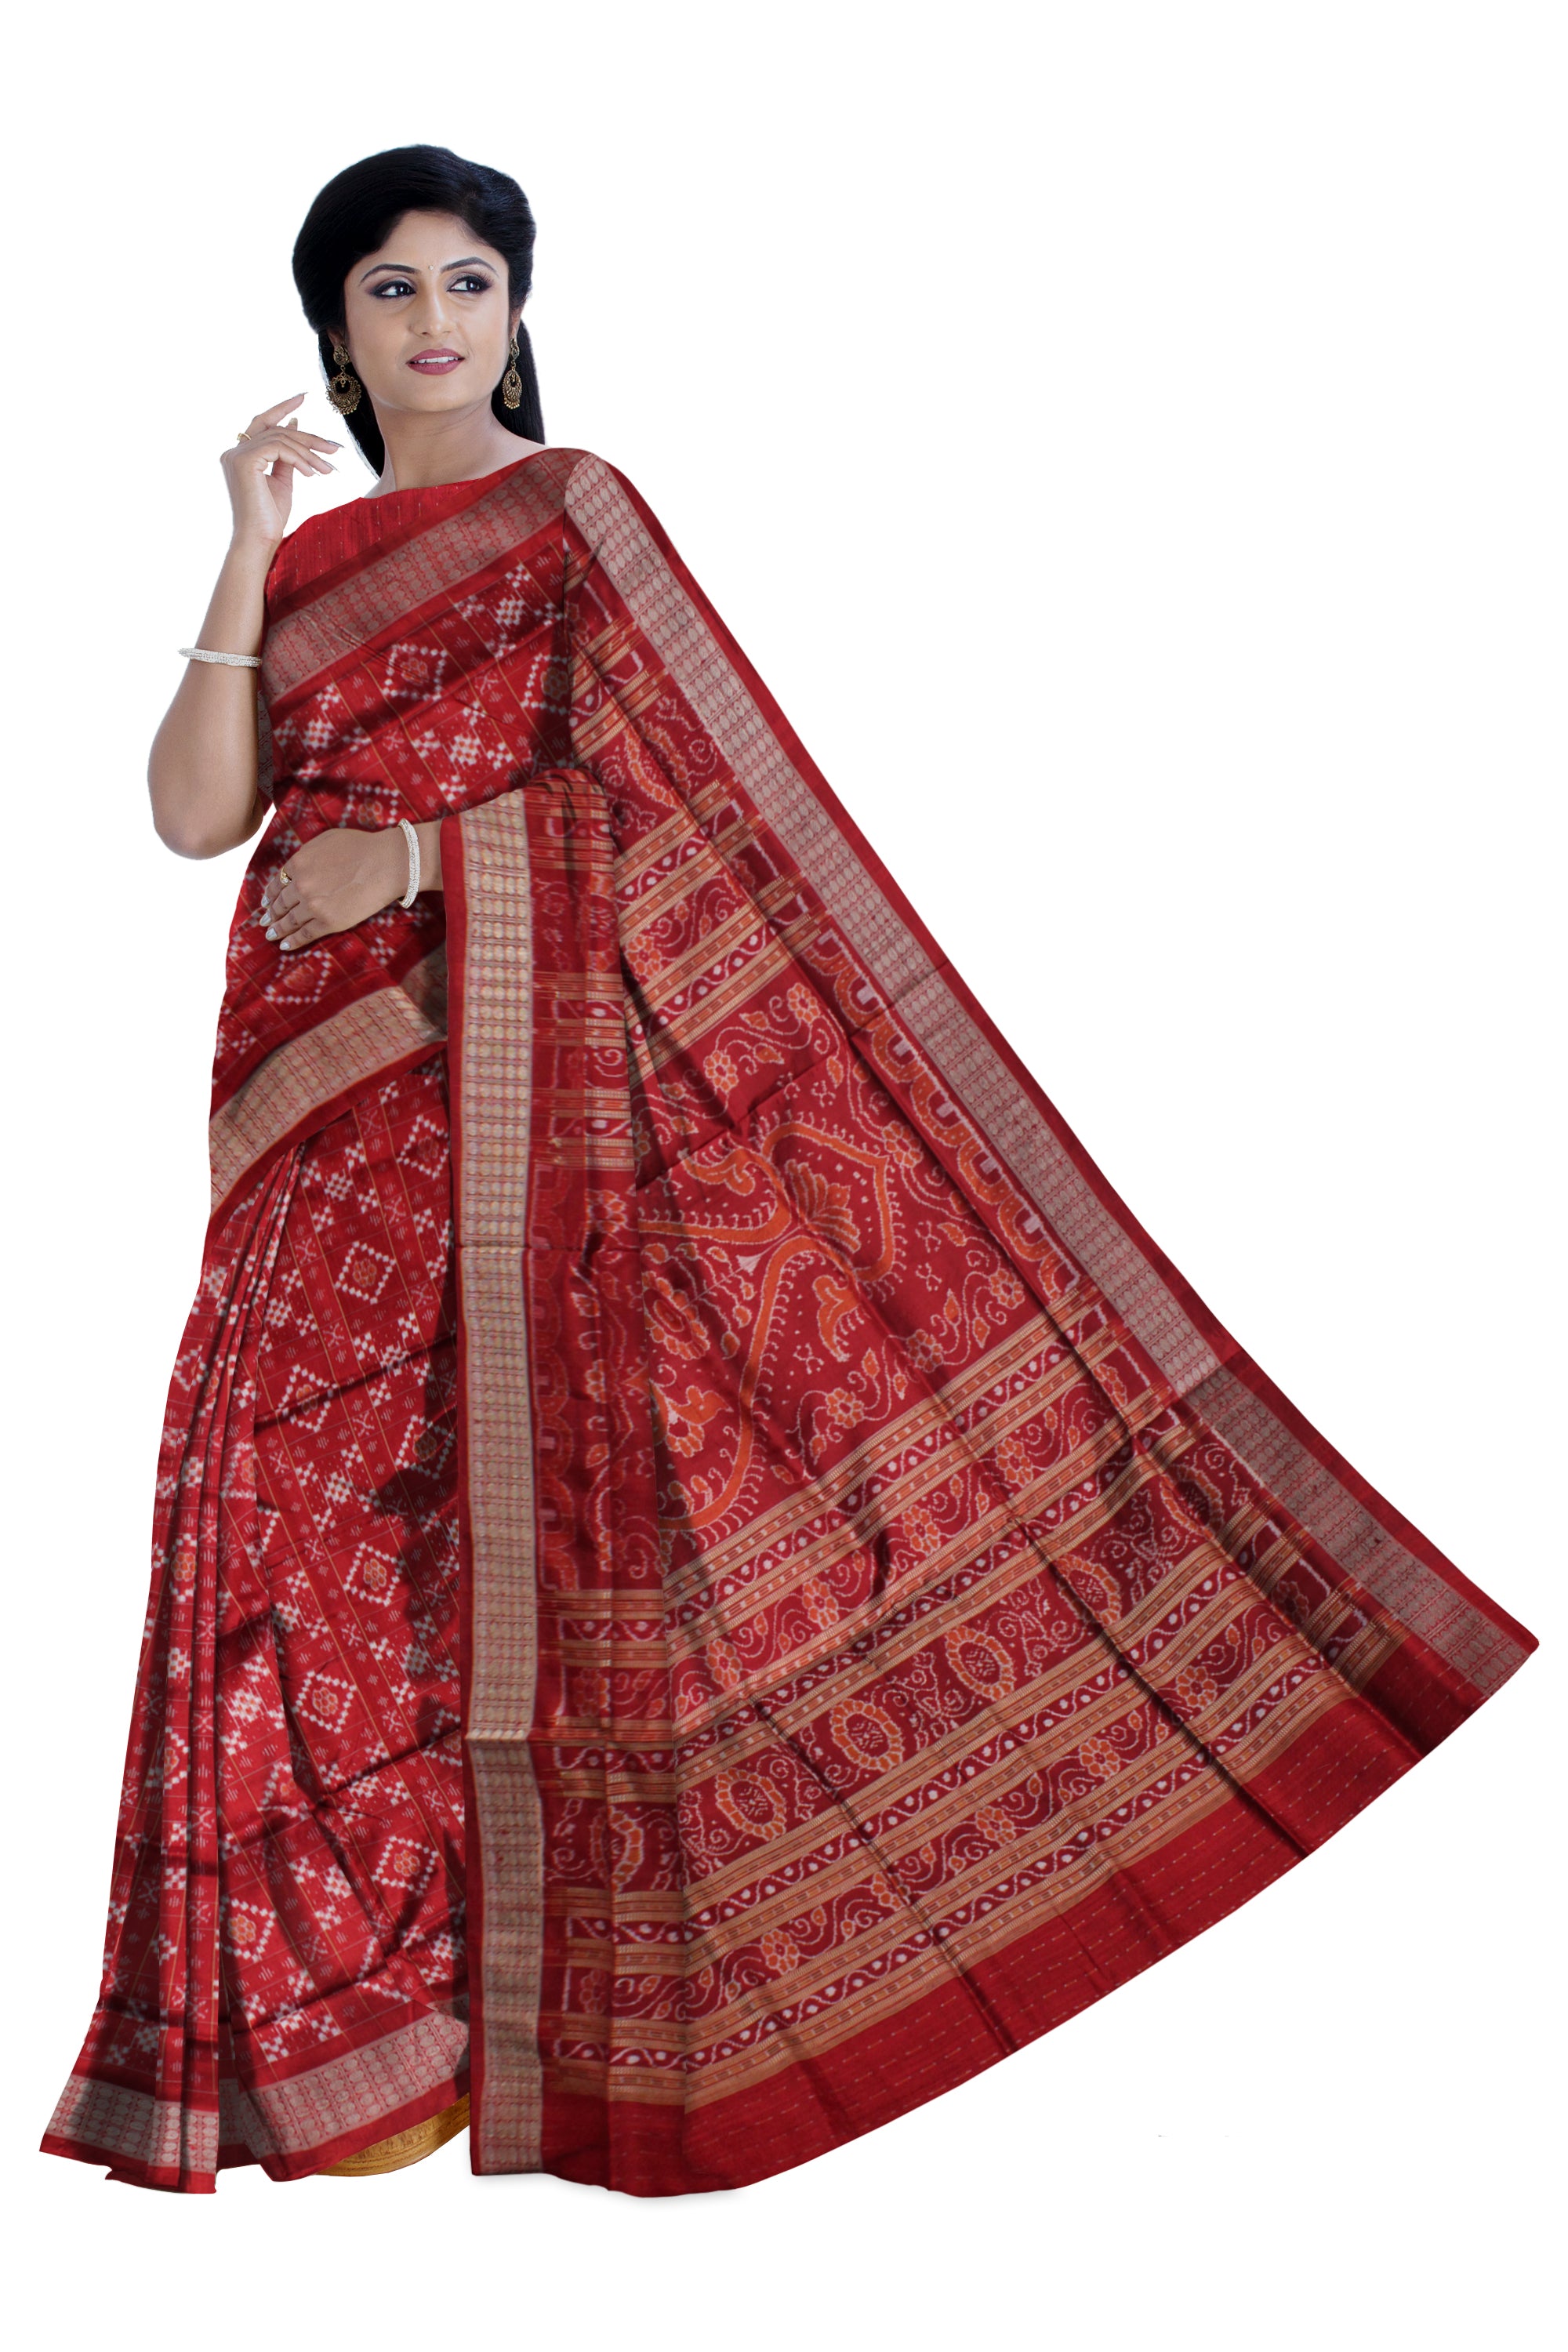 FULL BODY SMALL PASAPALI PATTERN PURE SILK SAREE IS MAROON COLOR,WITH BLOUSE PIECE. - Koshali Arts & Crafts Enterprise